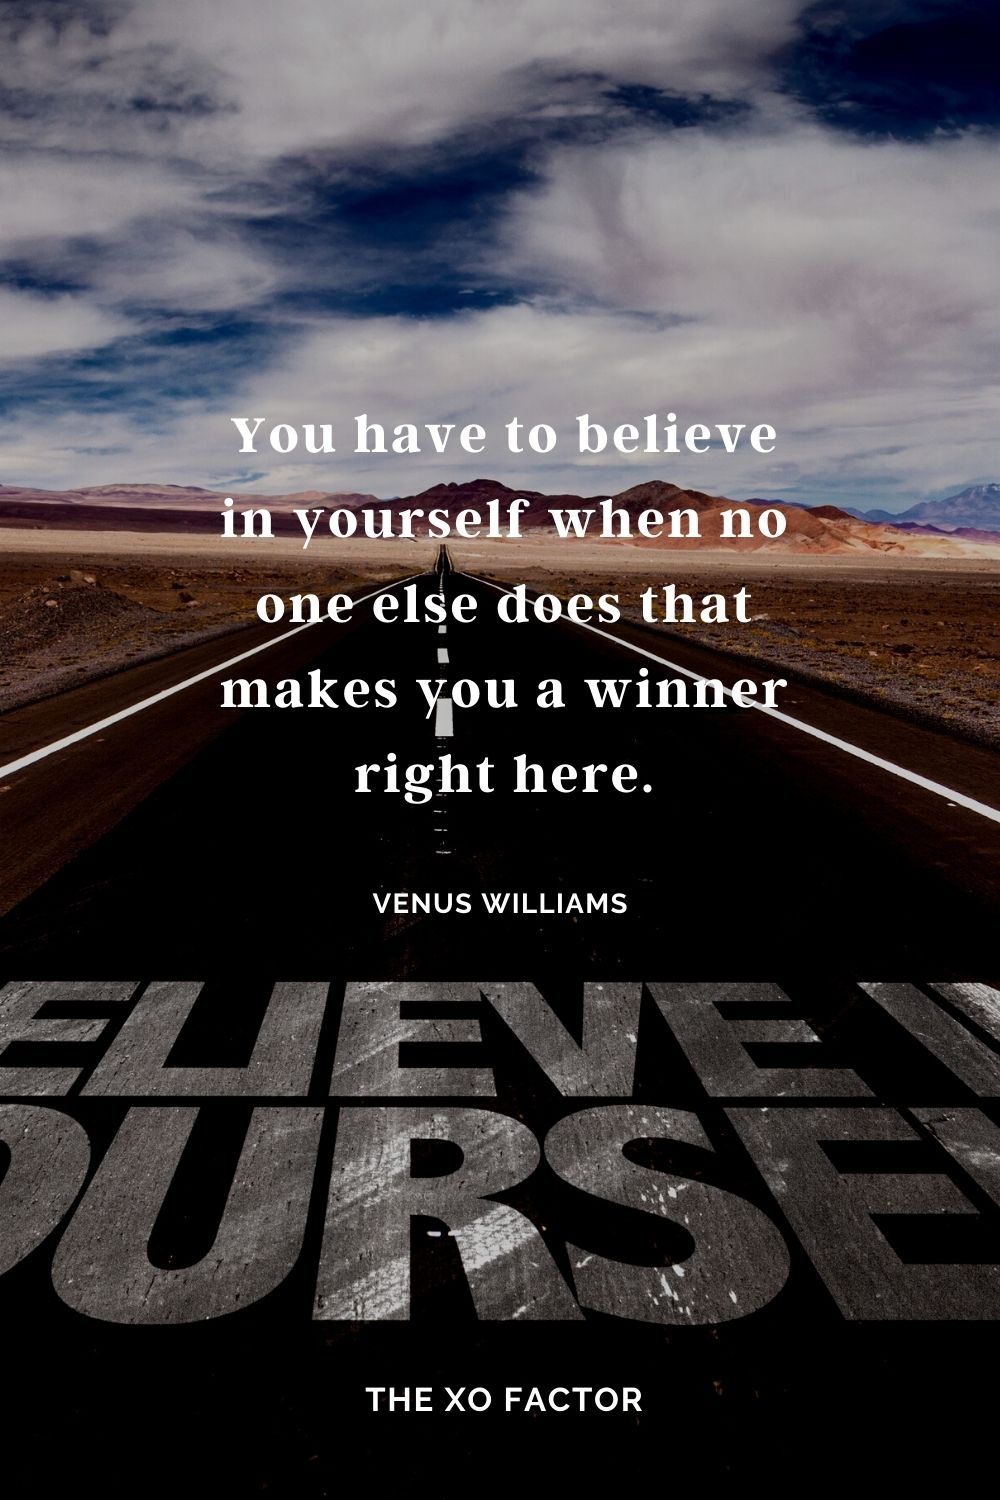 You have to believe in yourself when no one else does that makes you a winner right here. Venus Williams